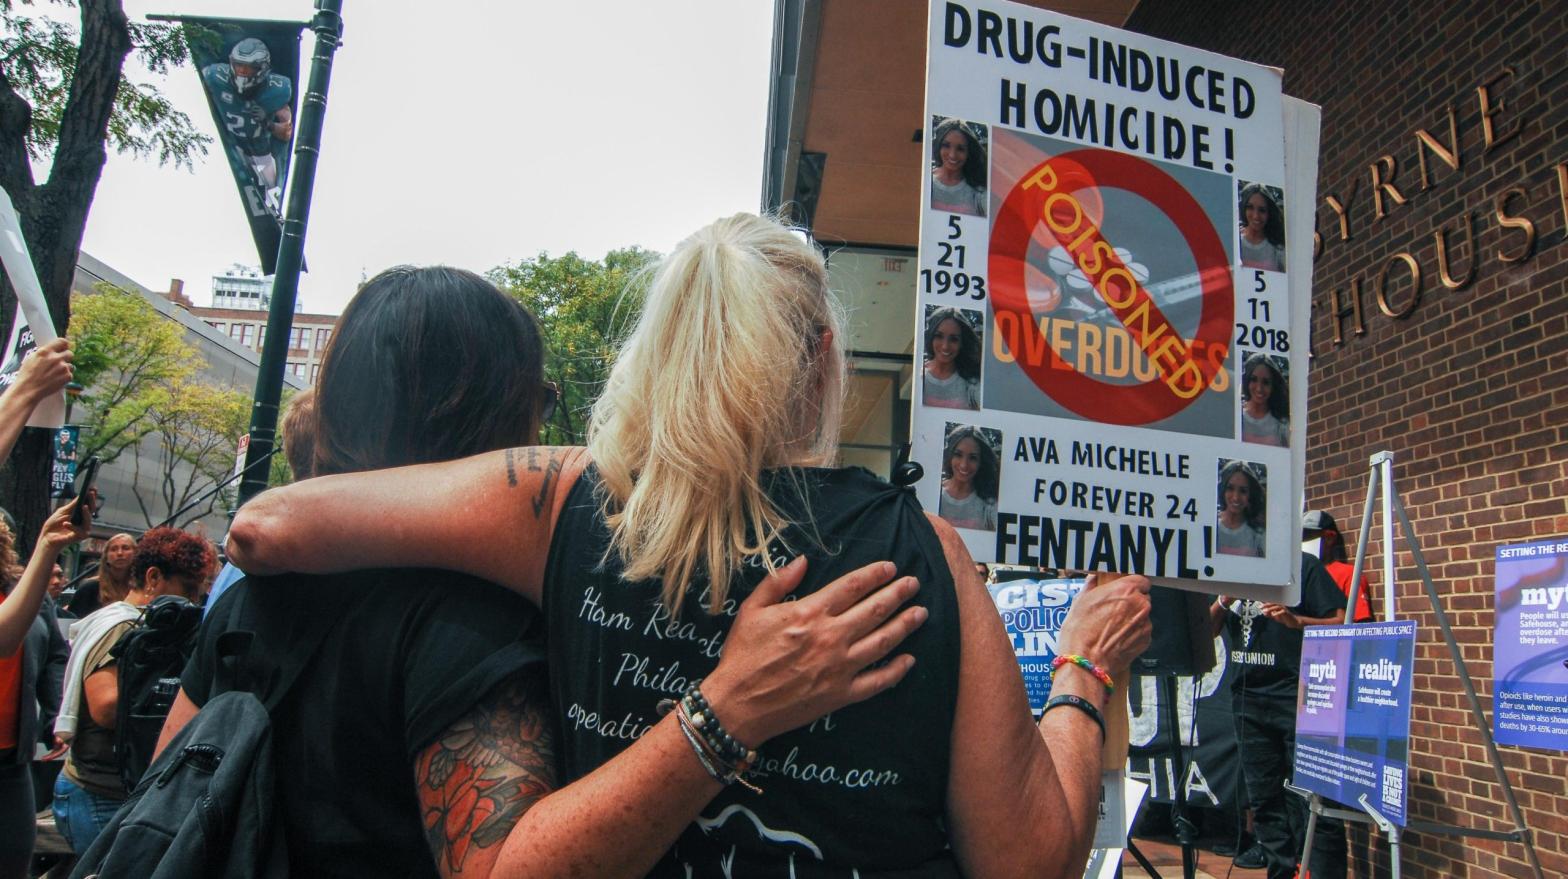 Advocates for safe injection sites rally in front of the James A Byrne Federal Courthouse in Philadelphia to show their support for evidence-based harm reduction policies, in a photo taken September 5, 2019. (Photo: Cory Clark/NurPhoto, Getty Images)